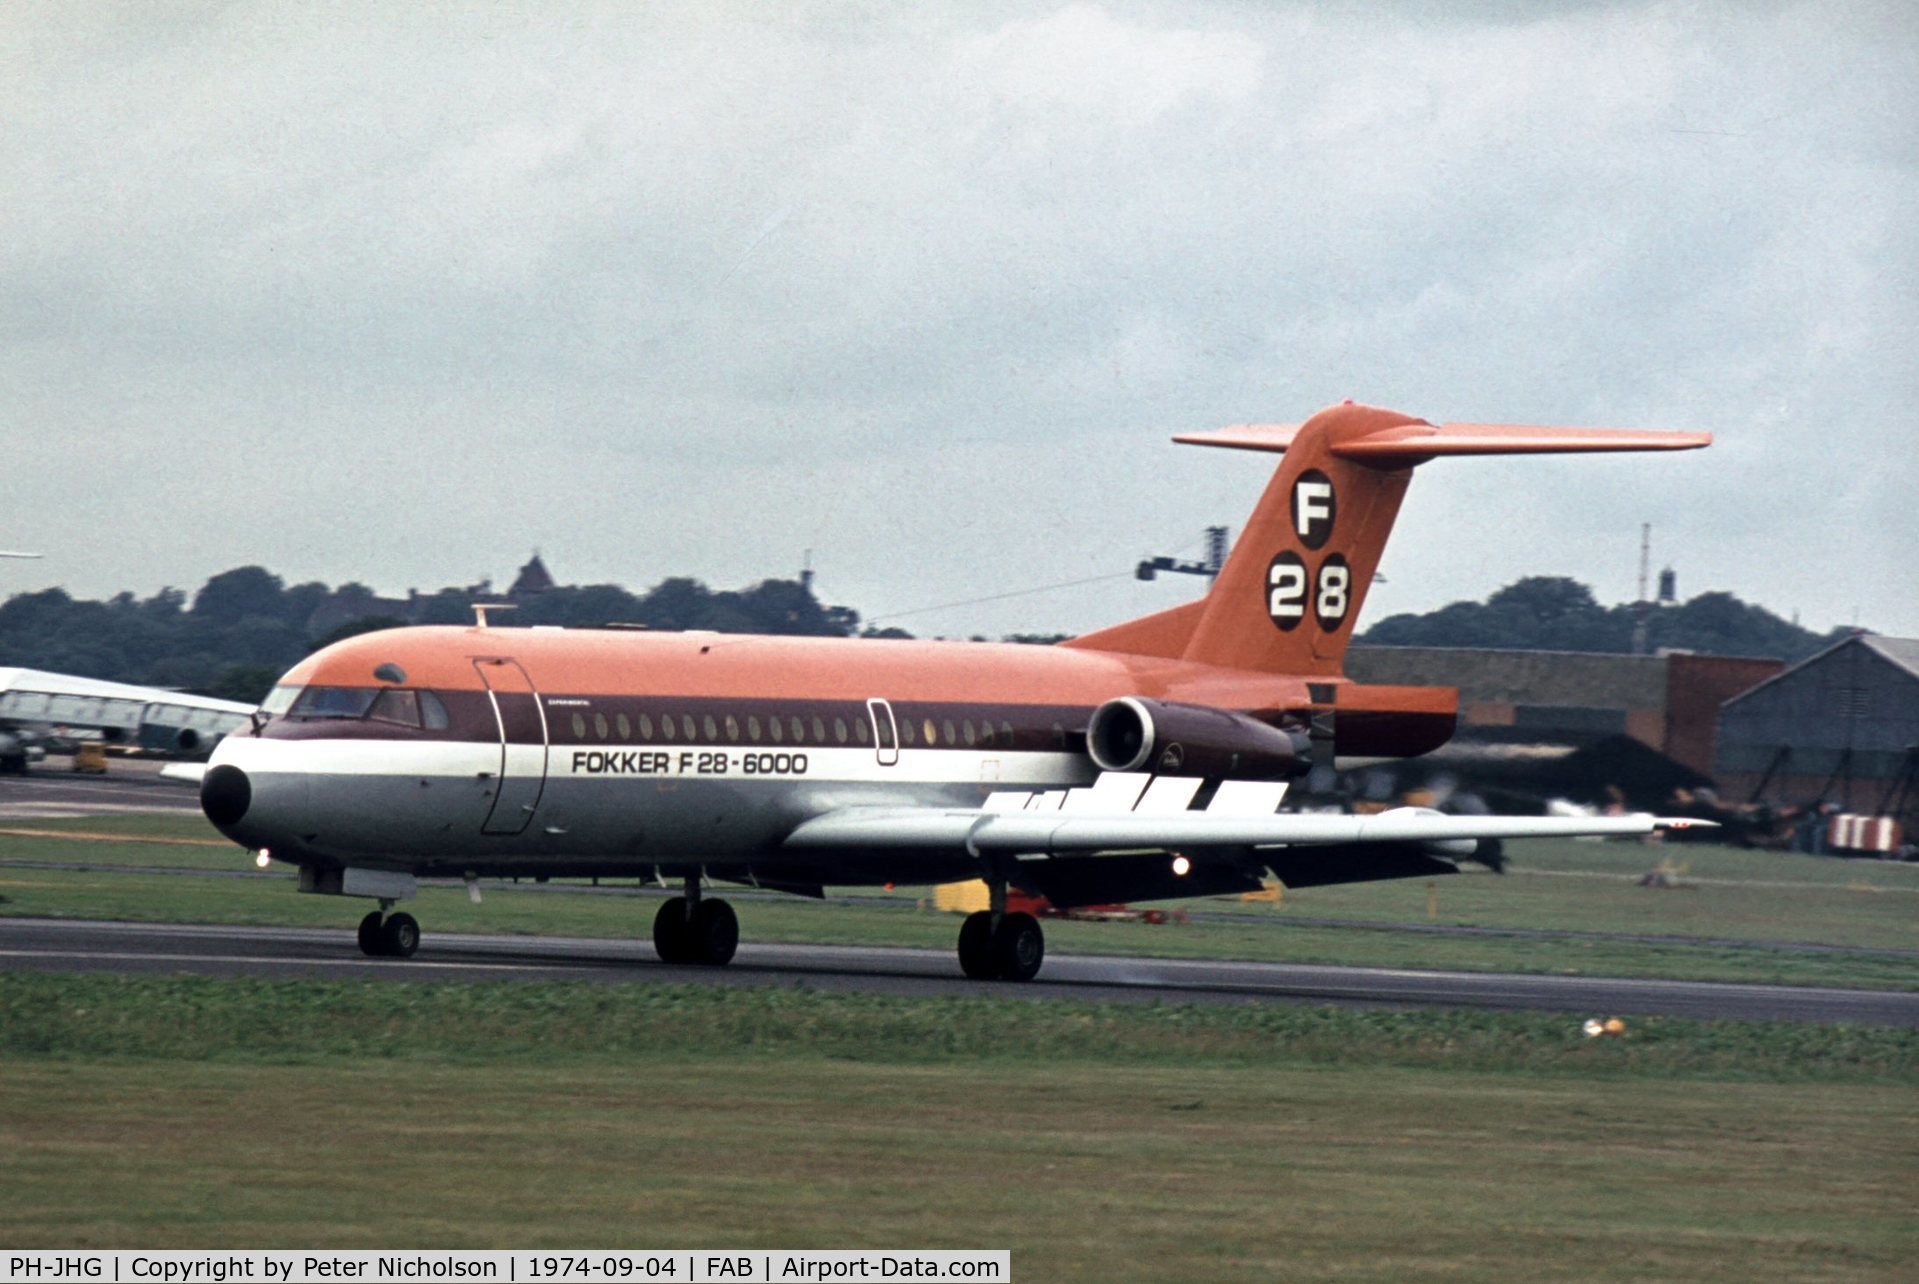 PH-JHG, 1967 Fokker F.28-6000 Fellowship C/N 11001, The prototype F28-6000 was demonstrated at the 1974 Farnborough Airshow.